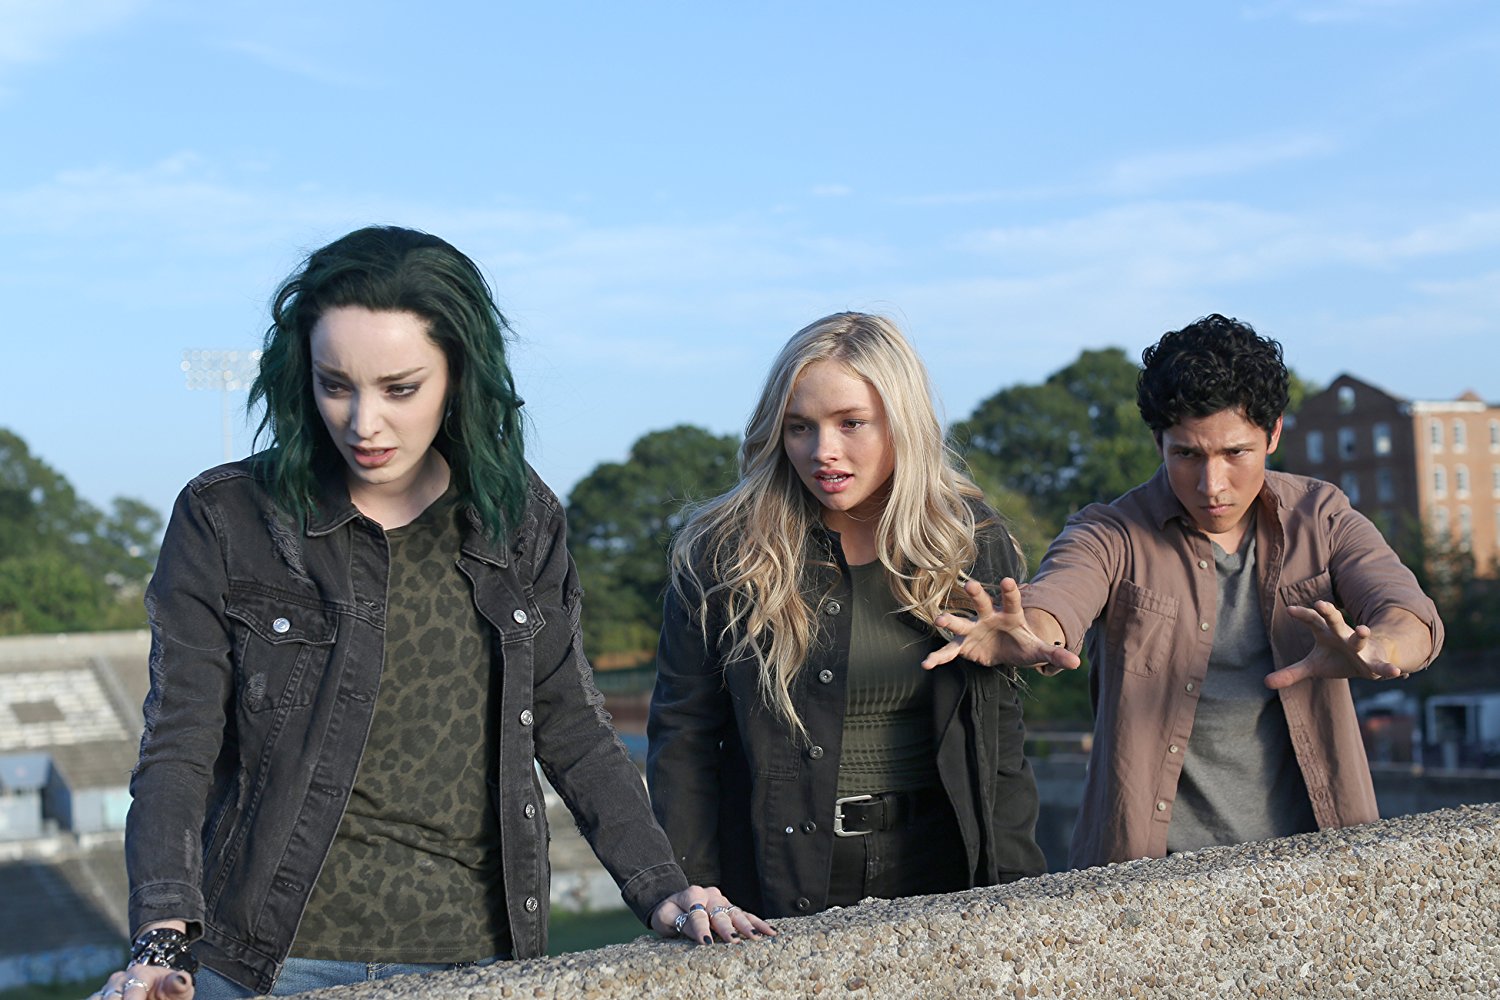 So is the gifted gonna get sacked? : r/TheGifted